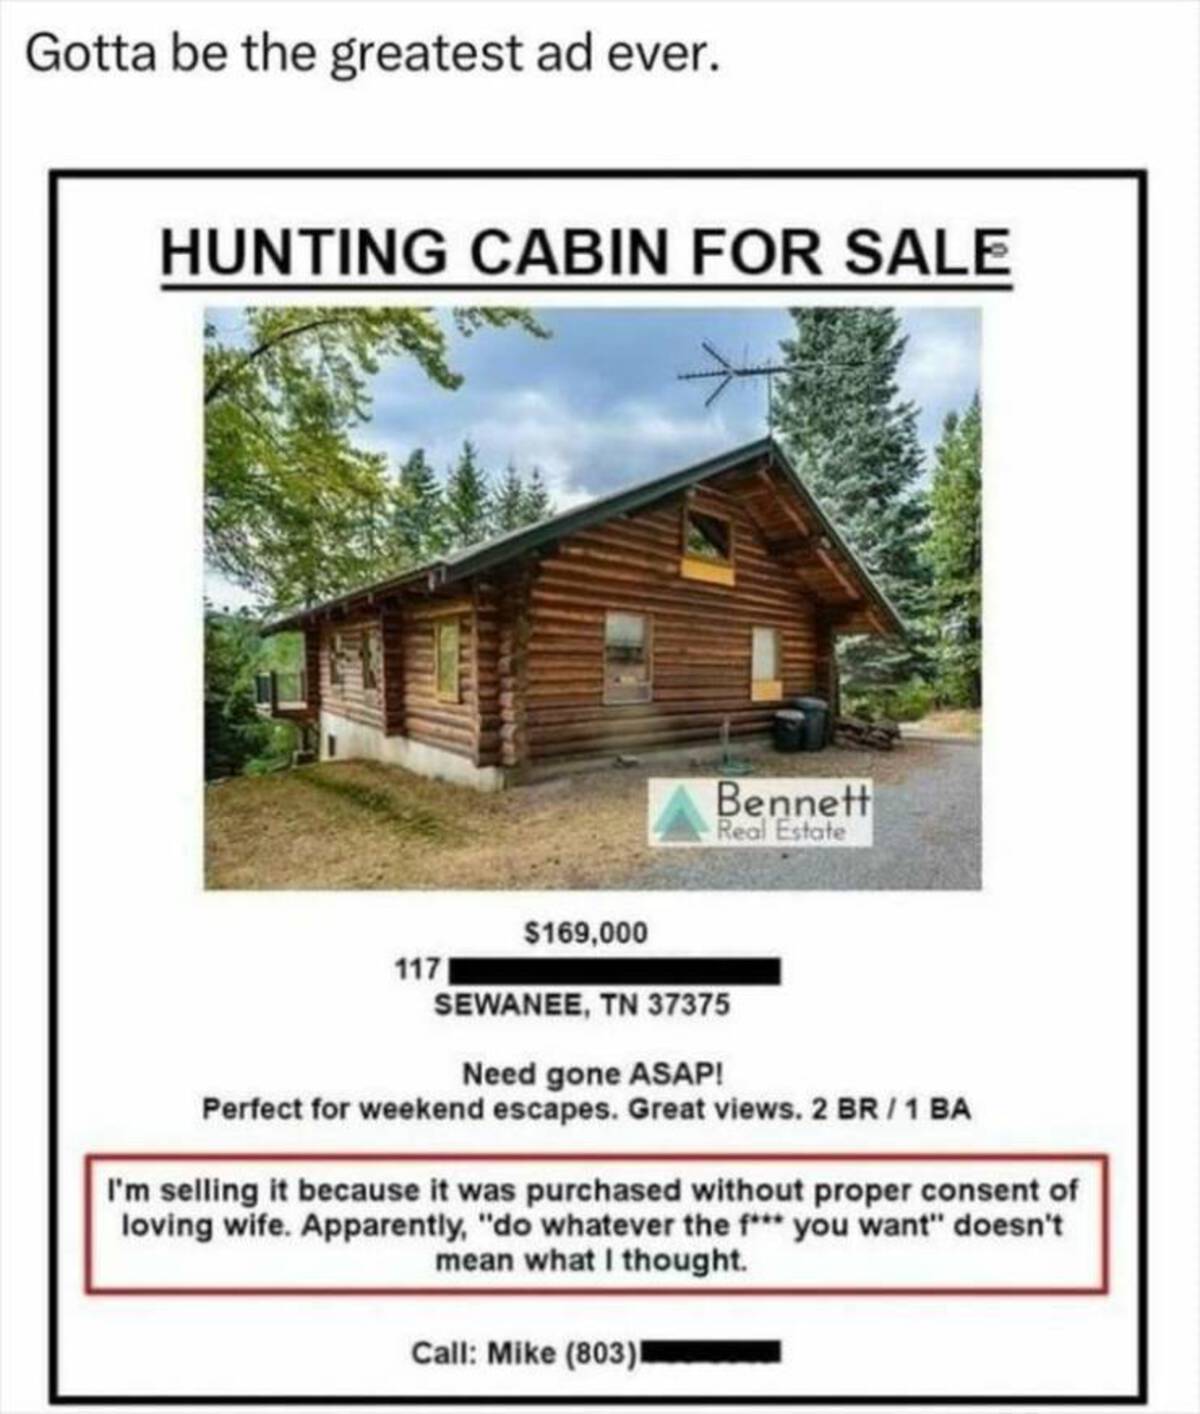 hunting cabin for sale meme - Gotta be the greatest ad ever. Hunting Cabin For Sale $169,000 Bennett Real Estate 117 Sewanee, Tn 37375 Need gone Asap! Perfect for weekend escapes. Great views. 2 Br1 Ba I'm selling it because it was purchased without prope